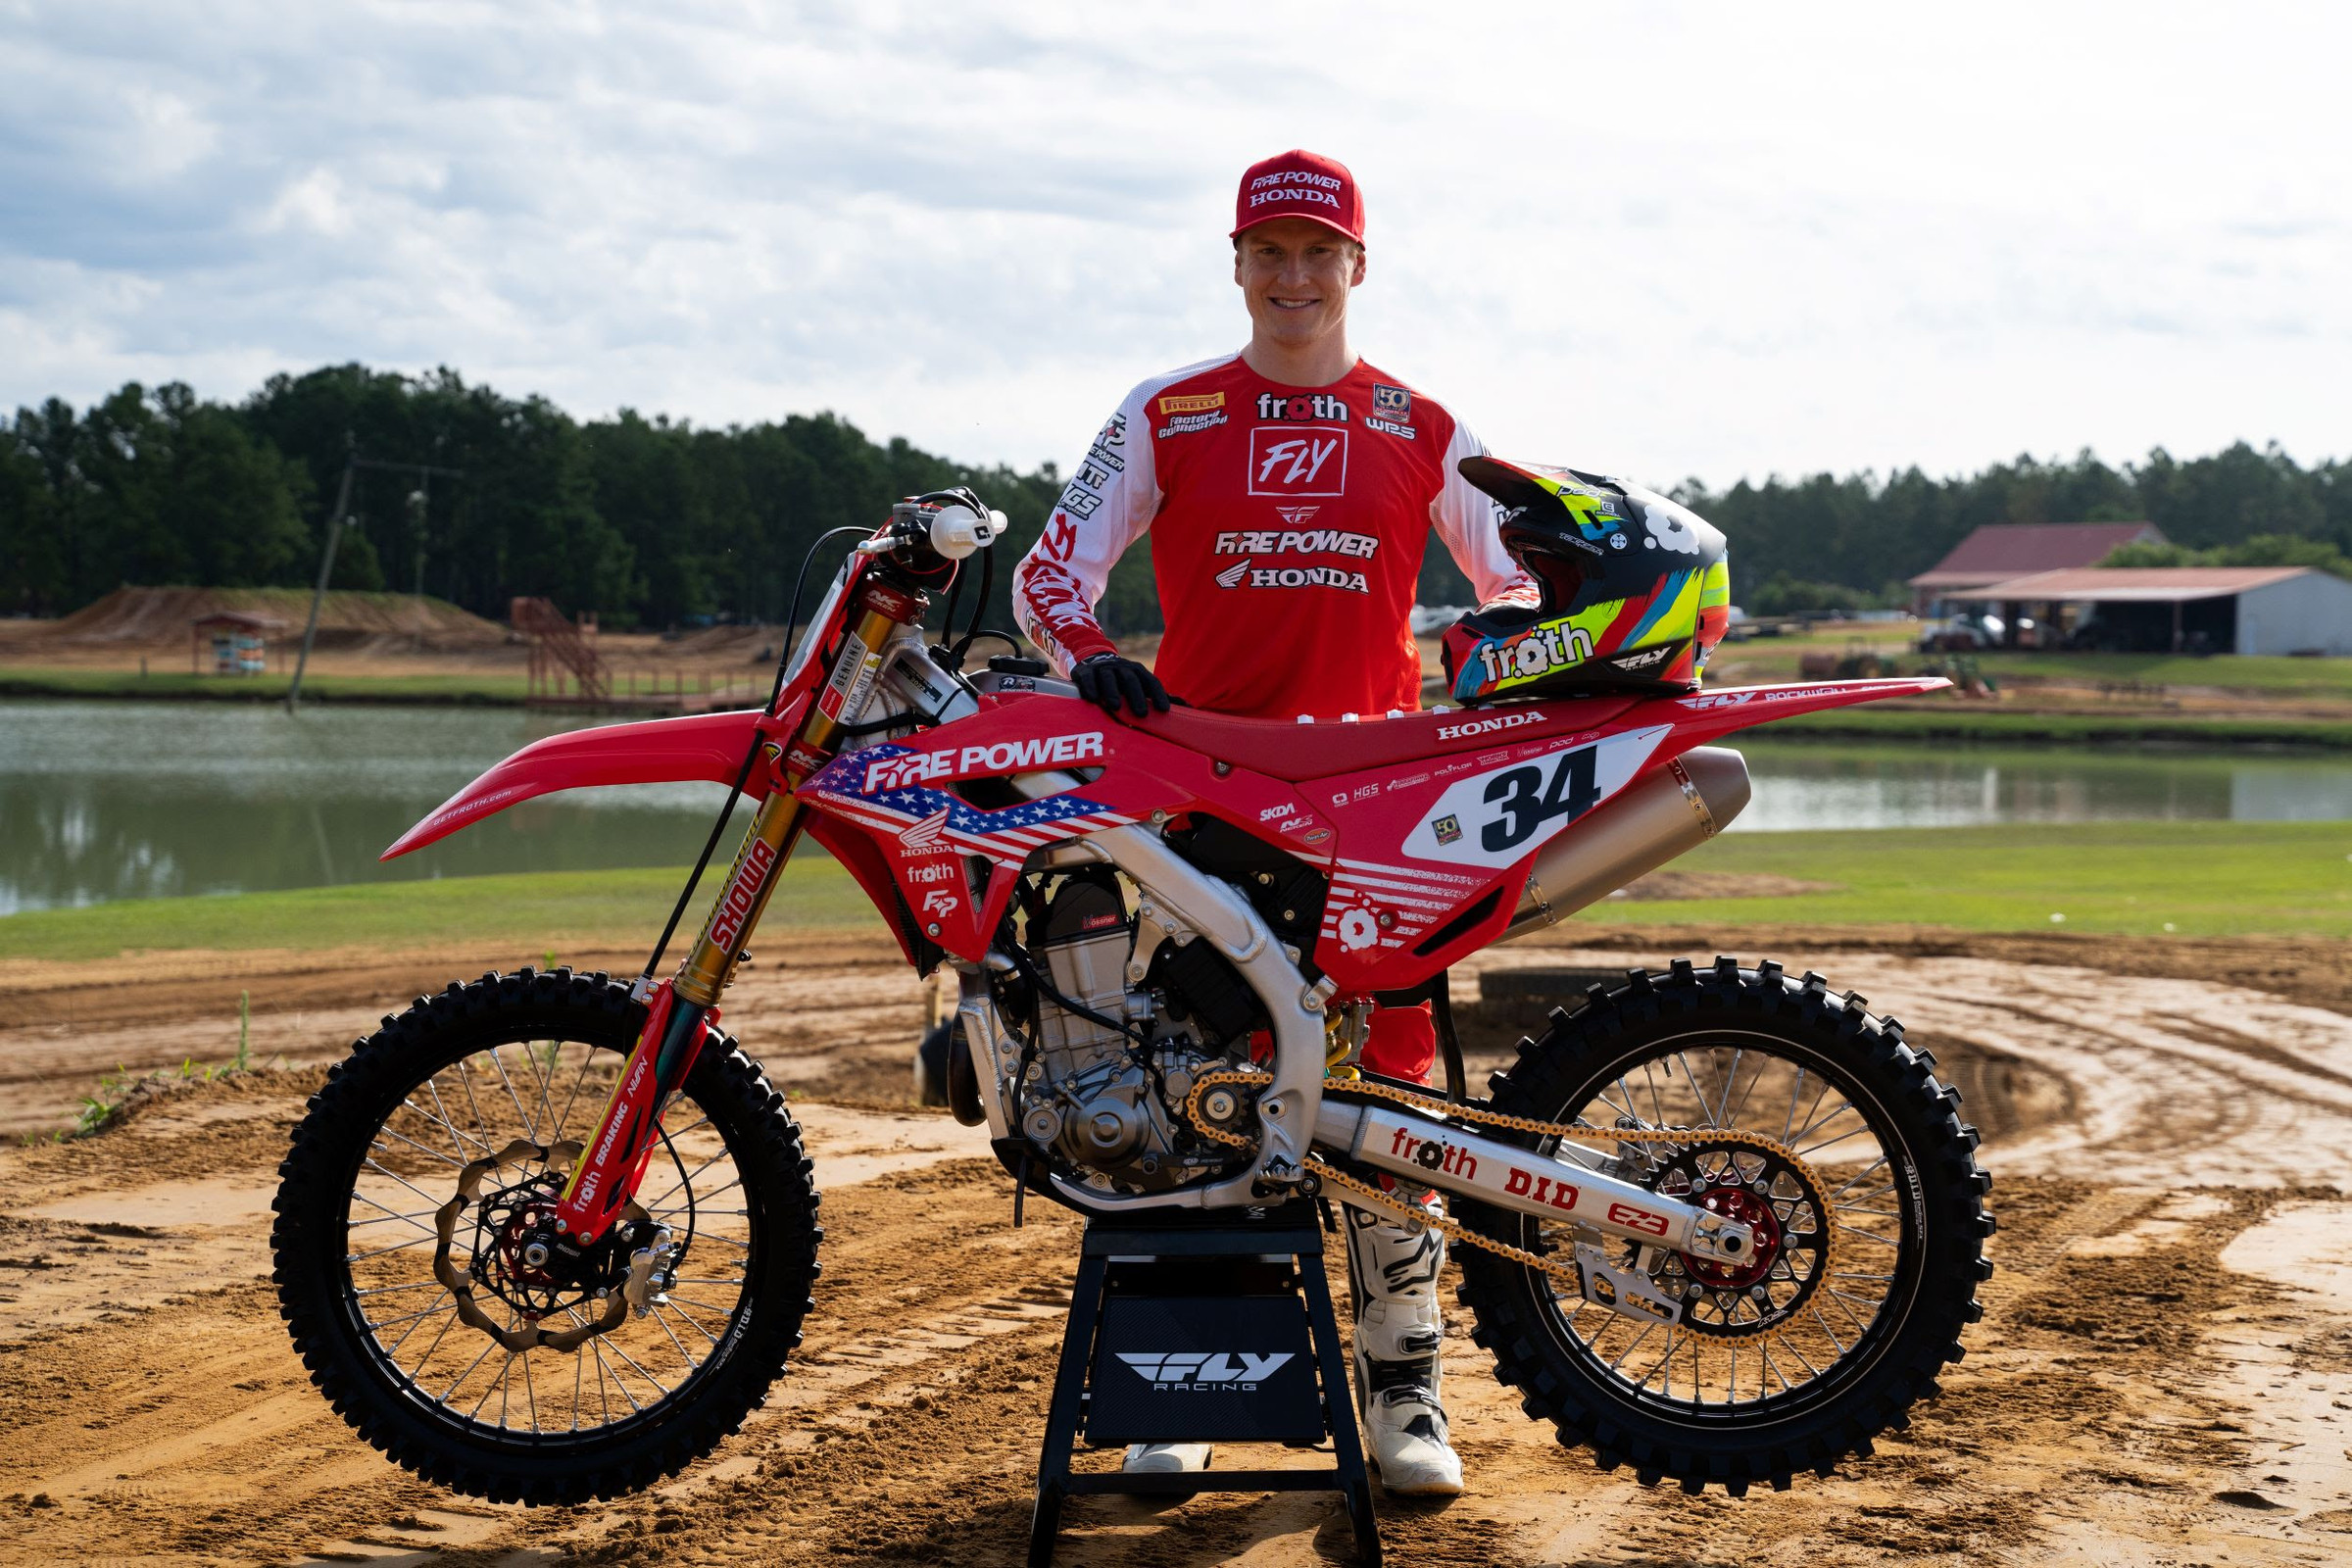 Max Anstie Signs with Fire Power Honda Racing, to Debut at RedBud